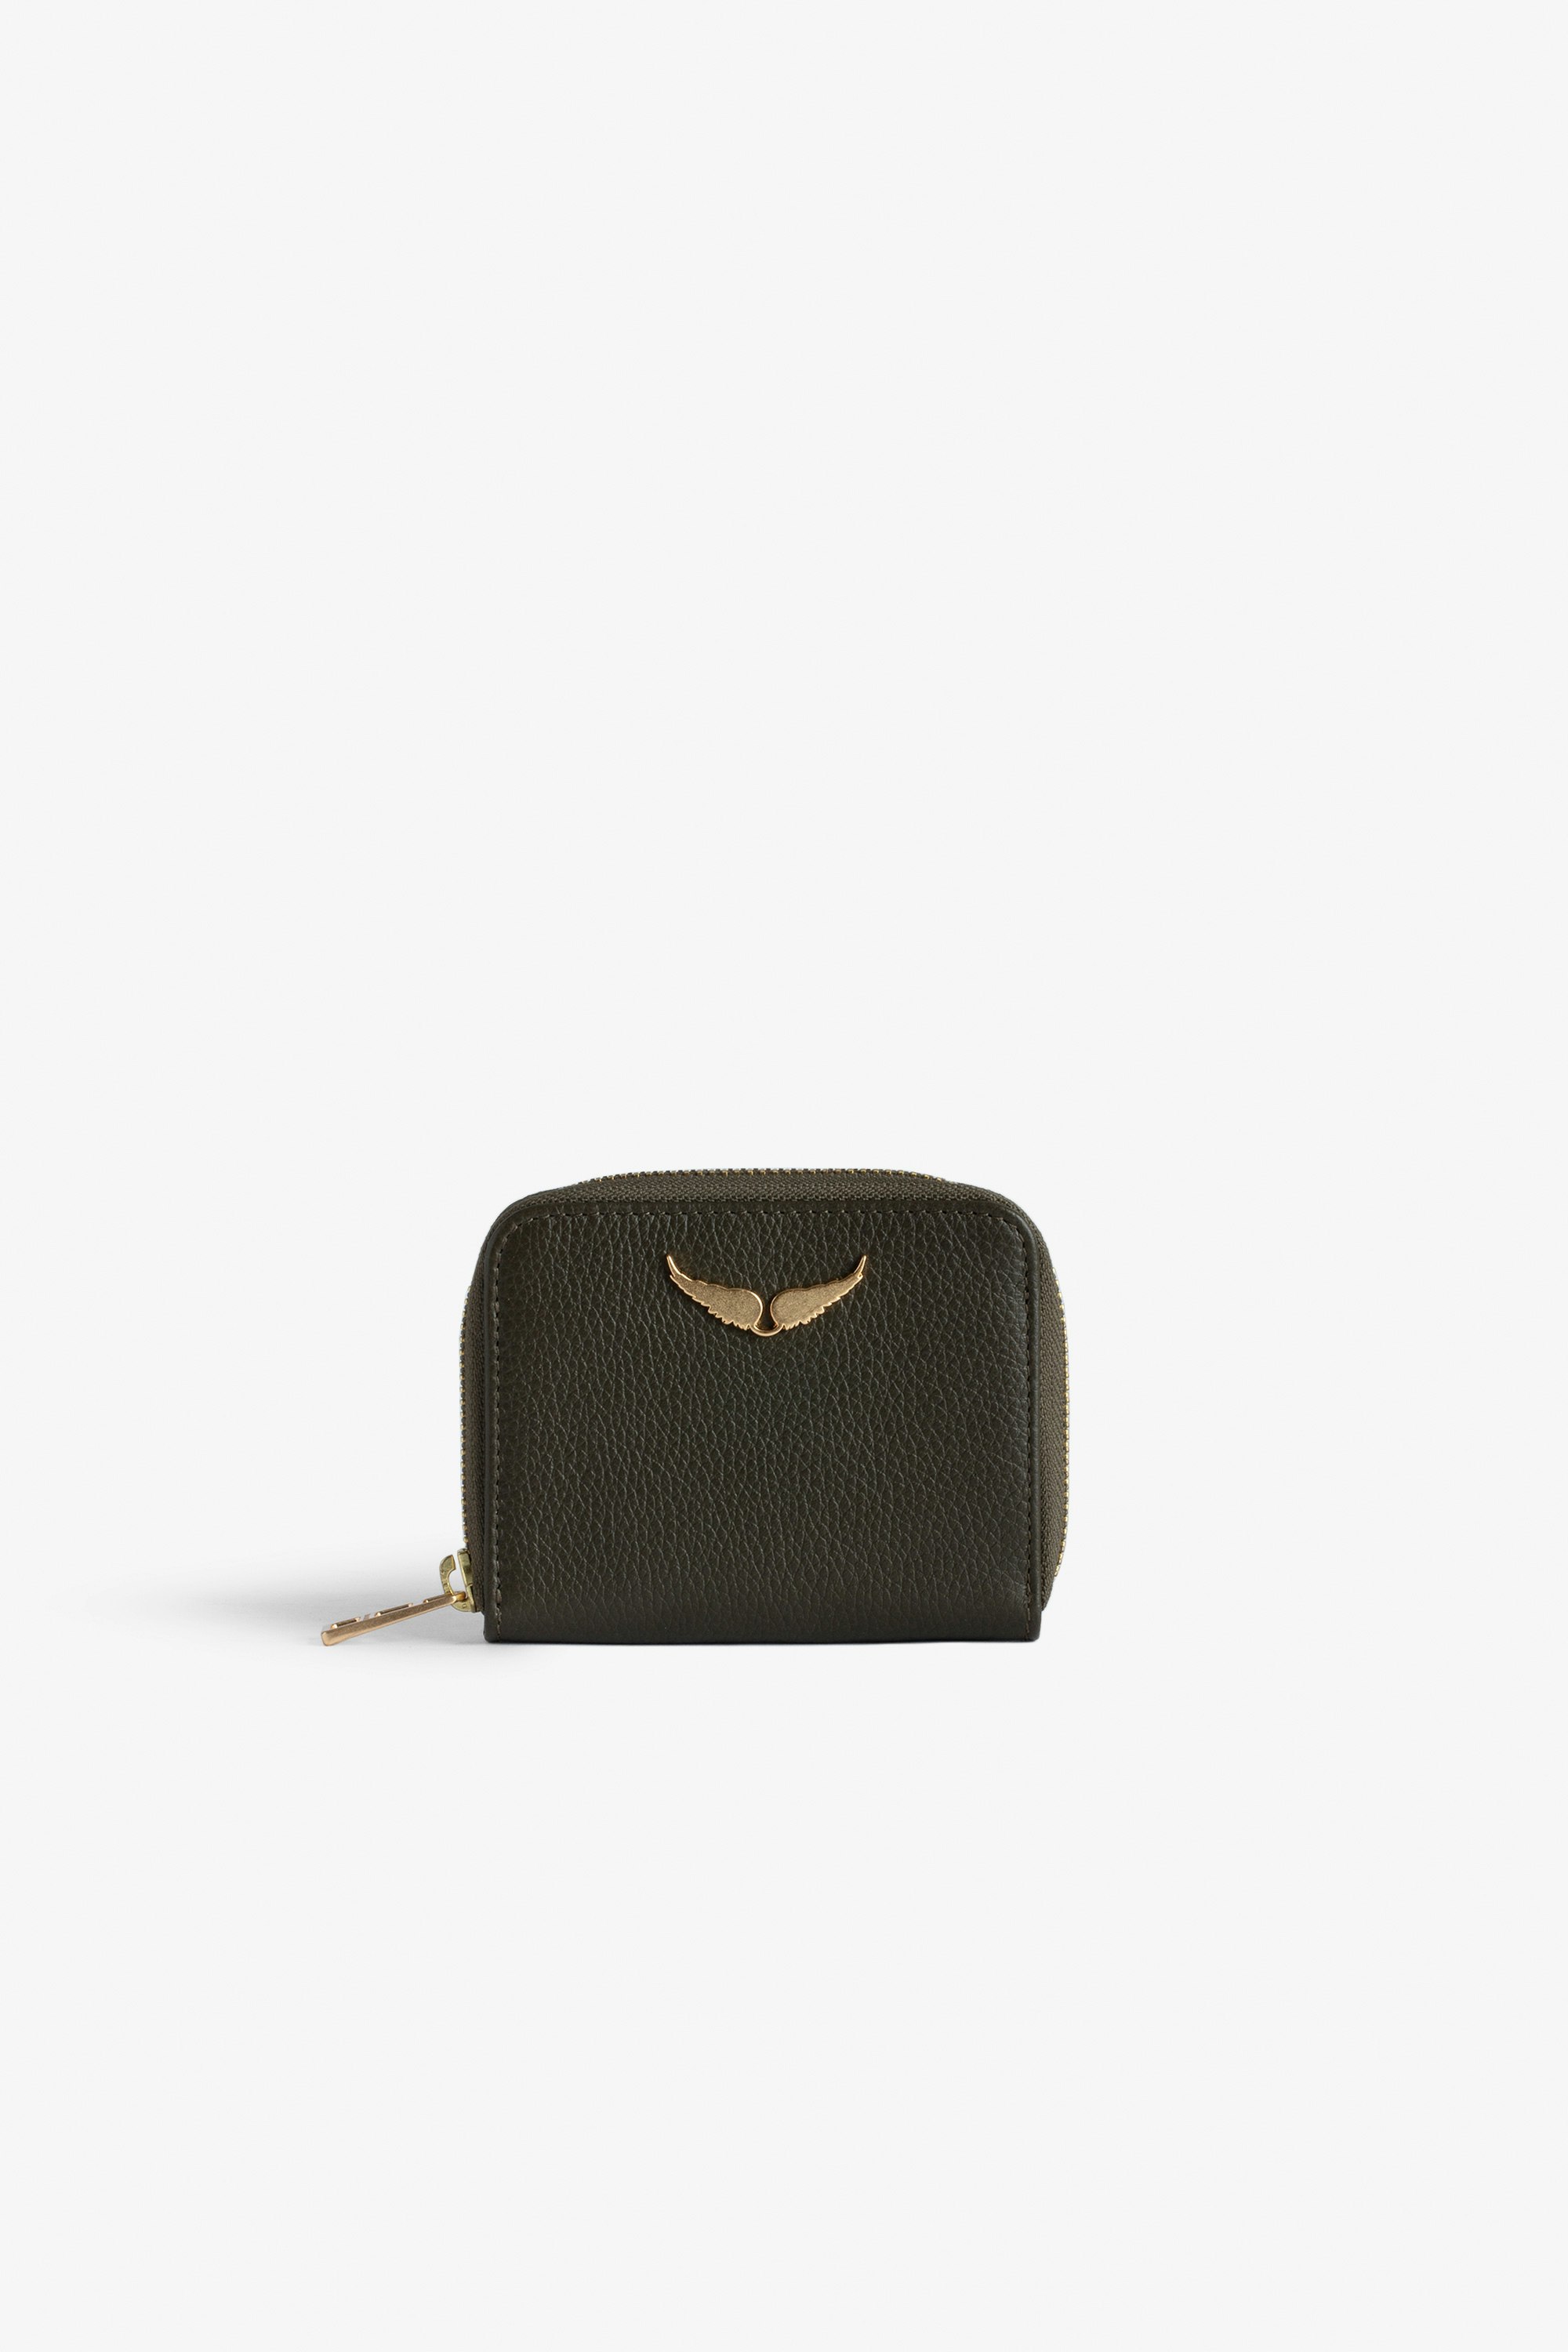 Mini ZV Coin 財布 - Women’s khaki grained leather card holder with gold-tone wings charm.